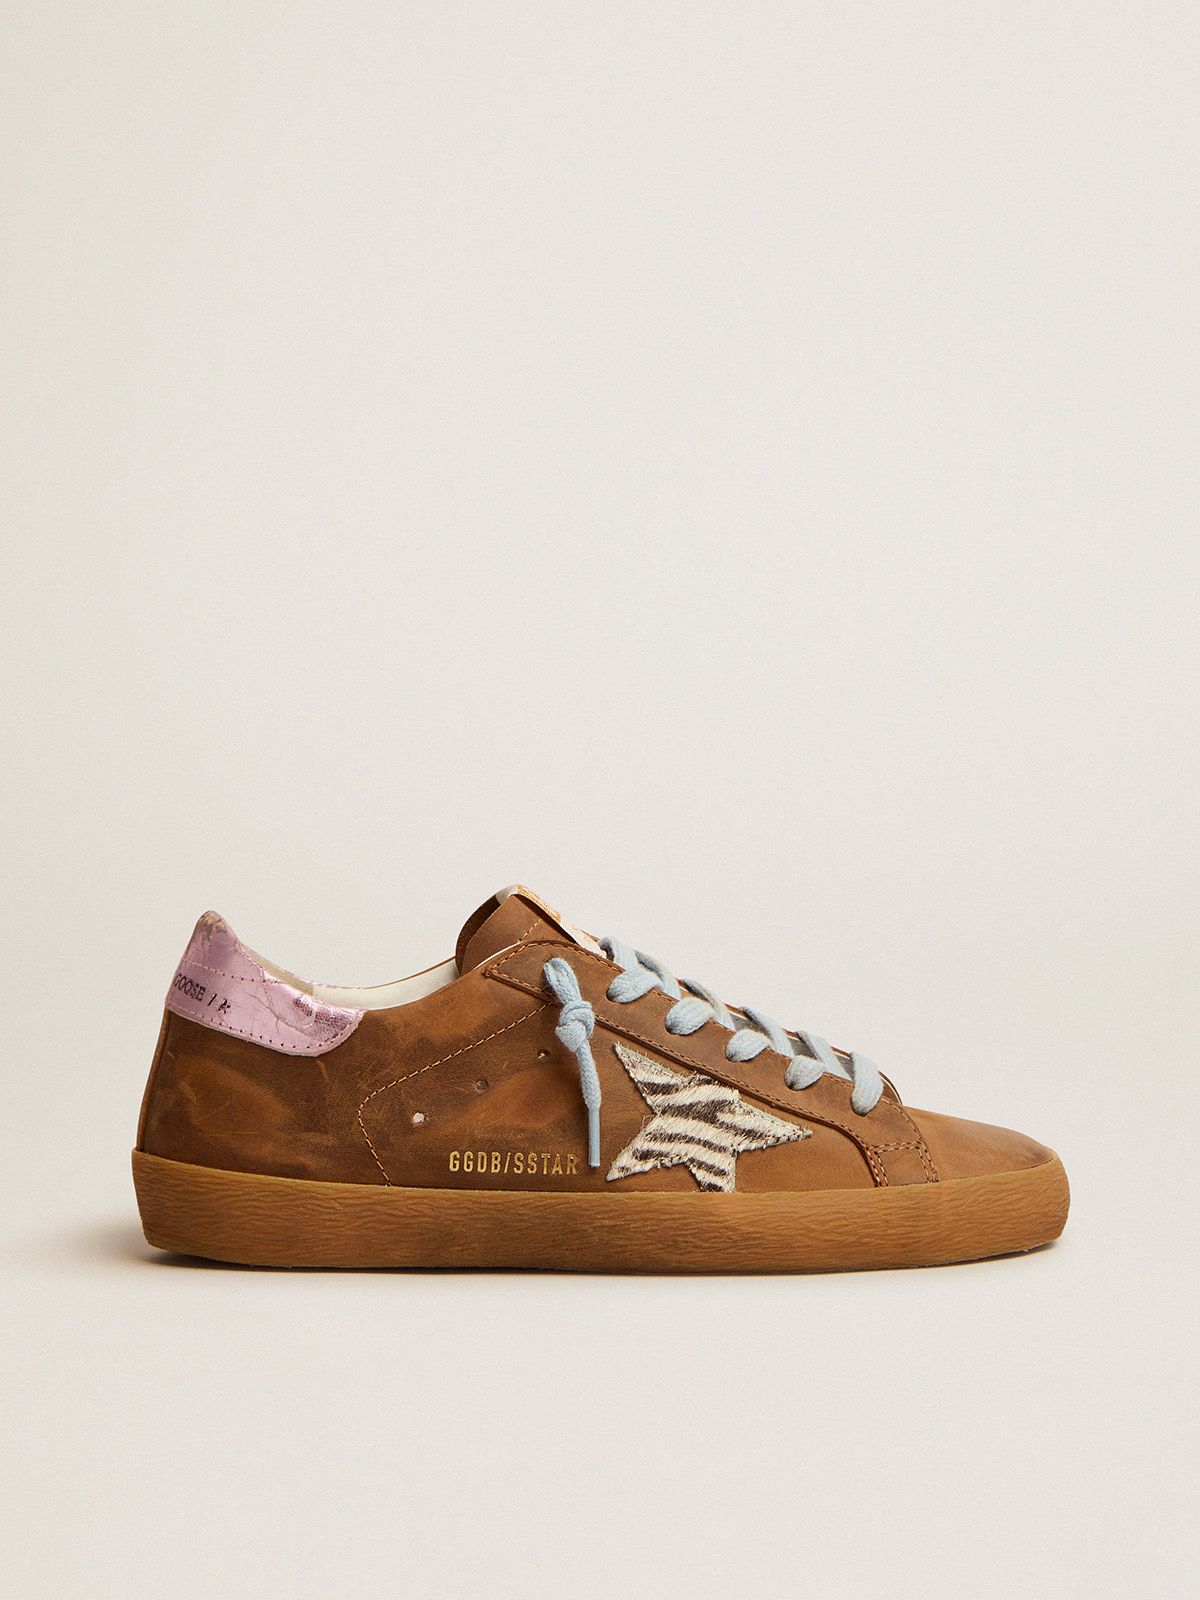 golden goose waxed pony brown star sneakers with Super-Star in skin zebra-print suede a